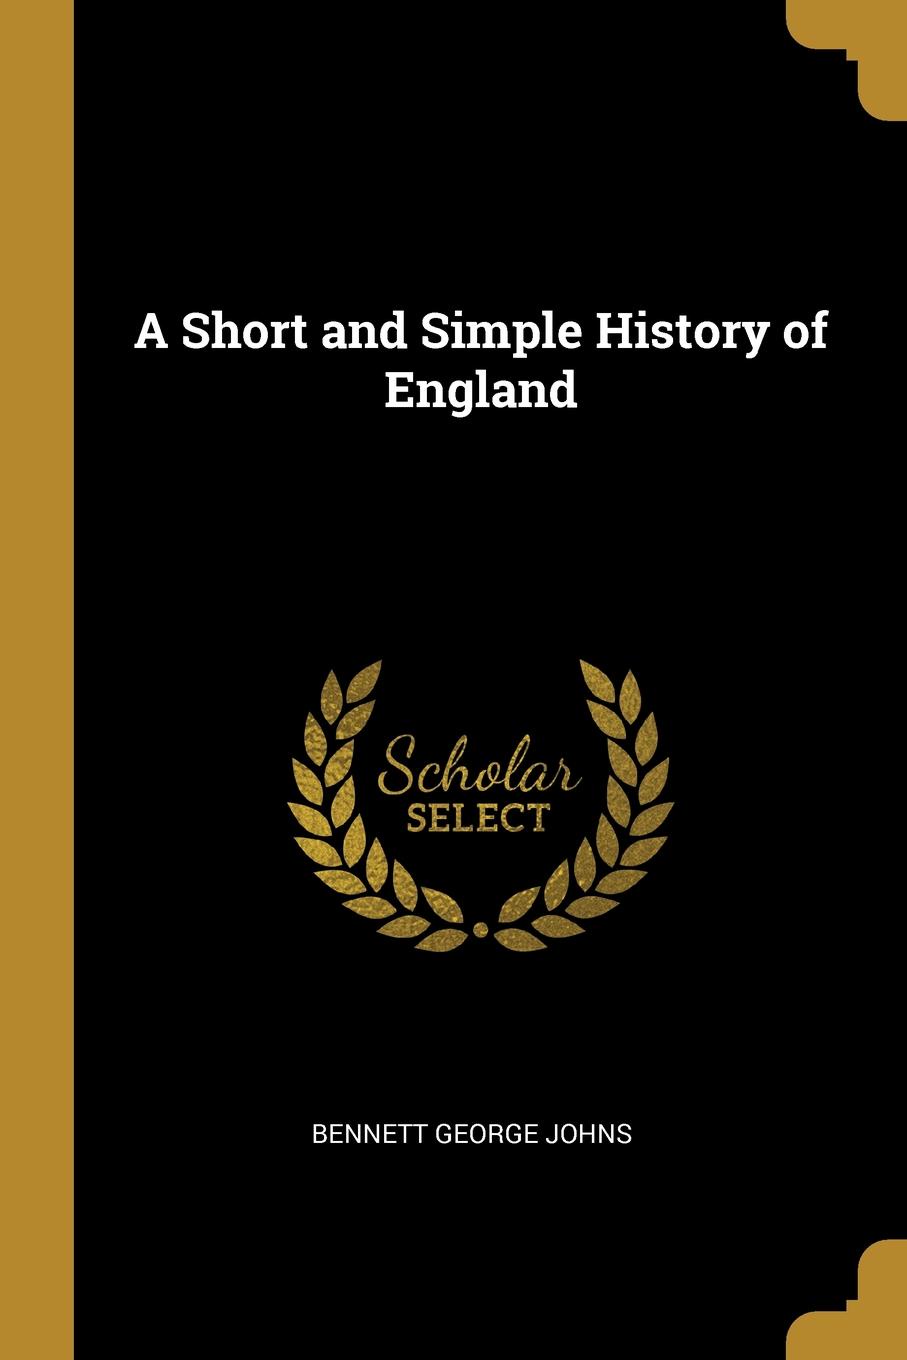 A Short and Simple History of England